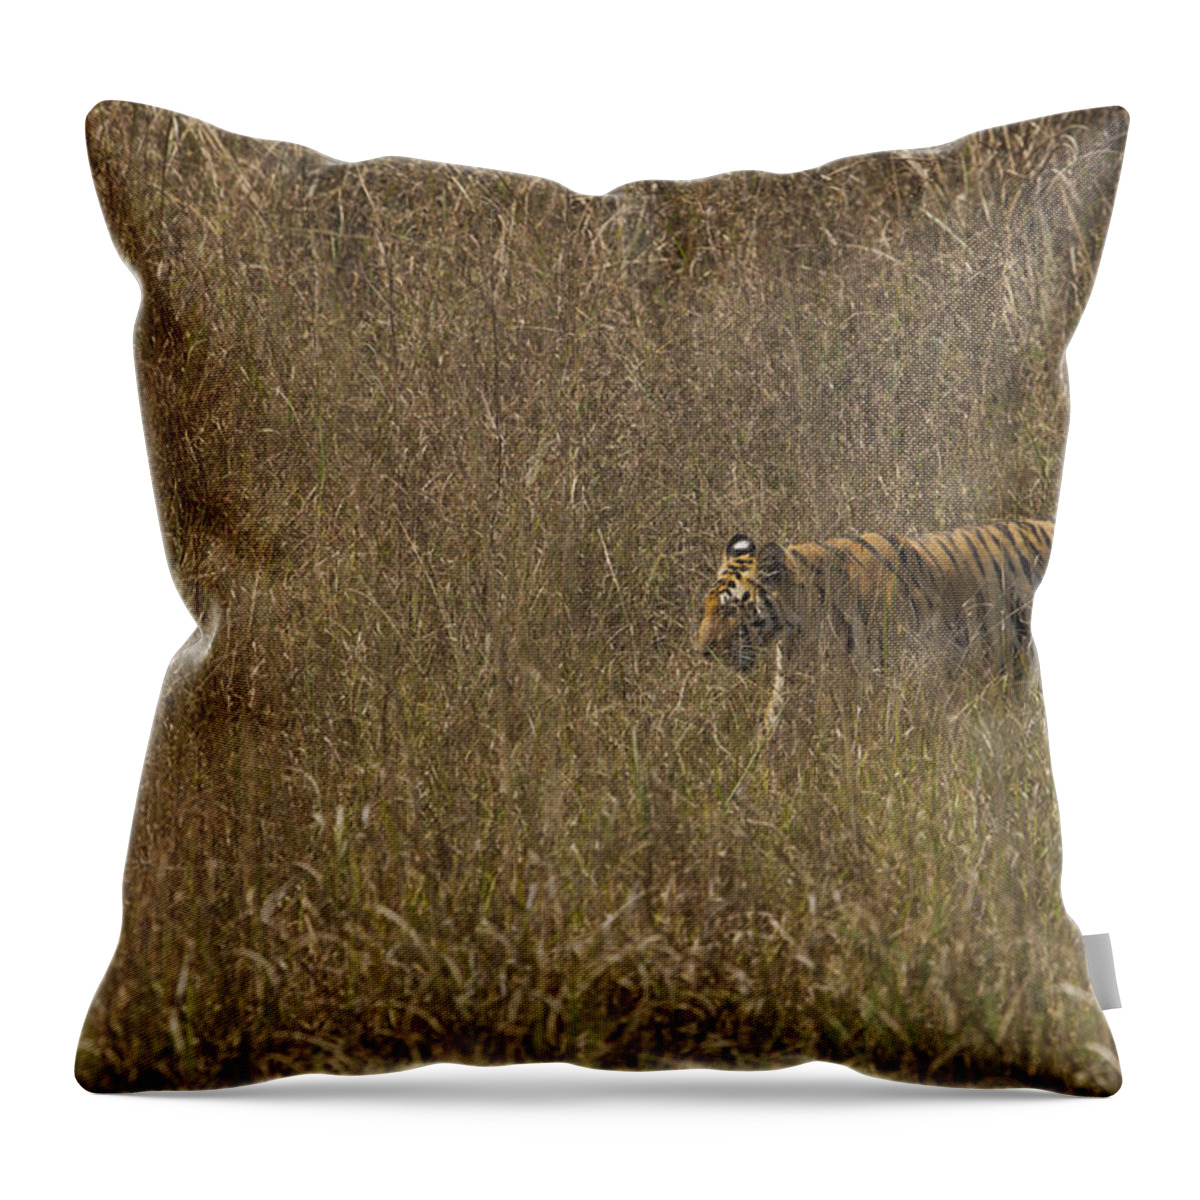 Grass Throw Pillow featuring the photograph Tiger Walking In Grass by Doug Cheeseman